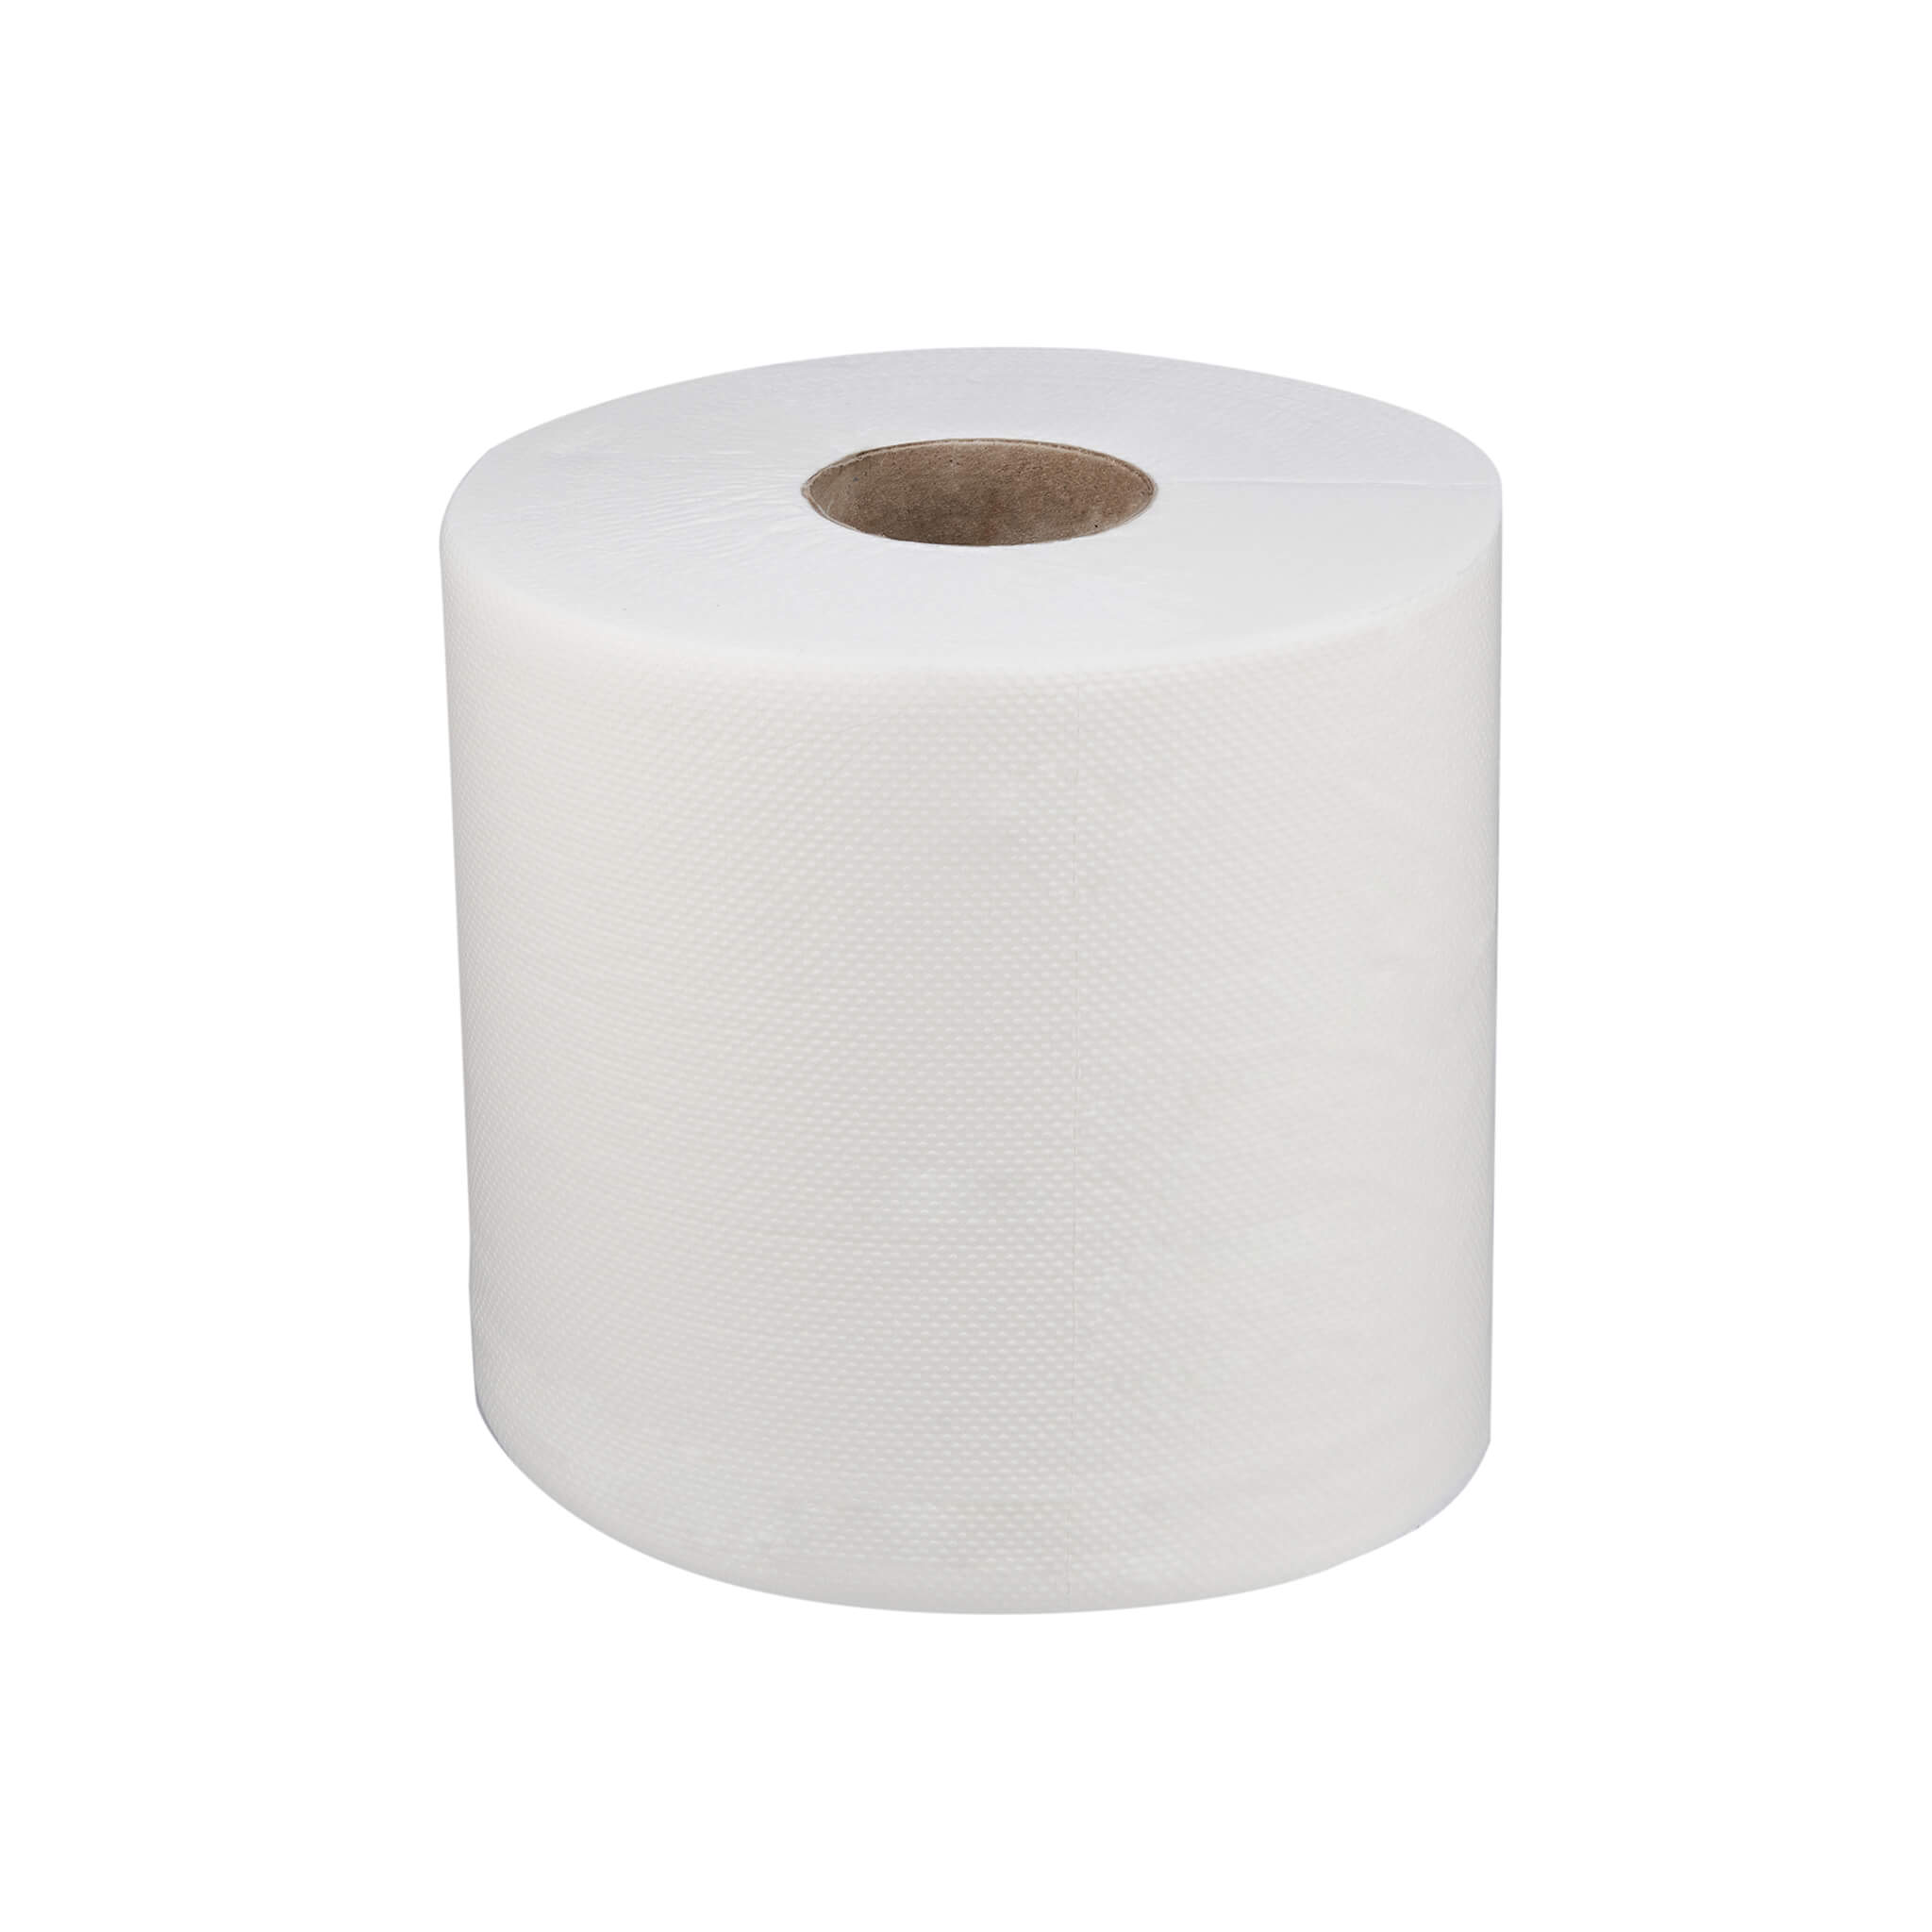 Soft N Cool Maxi Roll 130 Meter Twin Pack - 2 Ply (15% OFF)